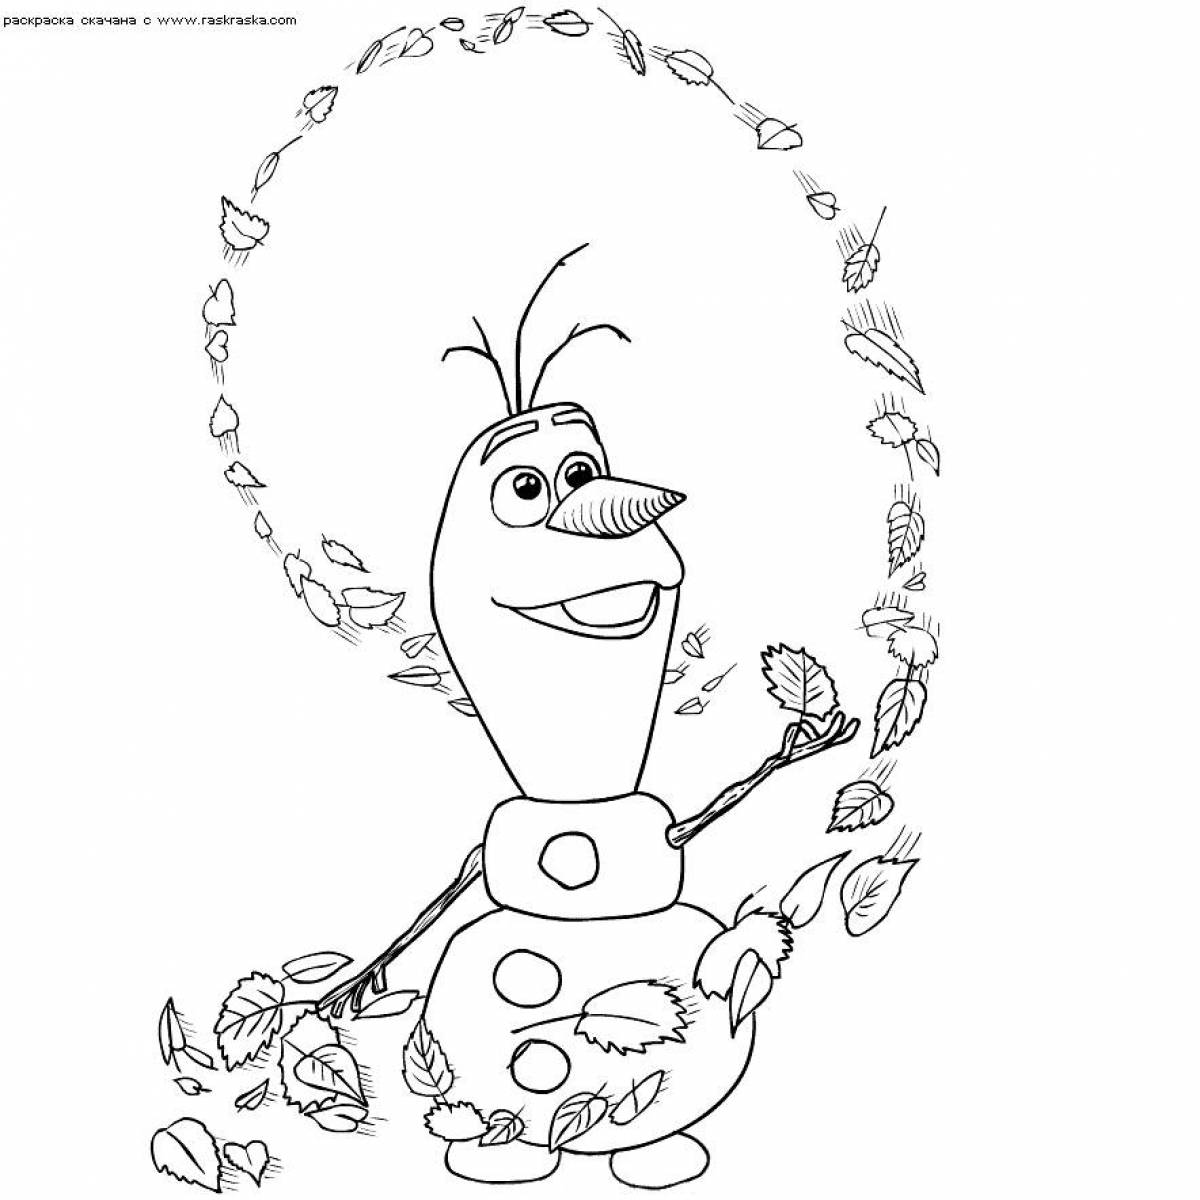 Olaf's charming coloring book